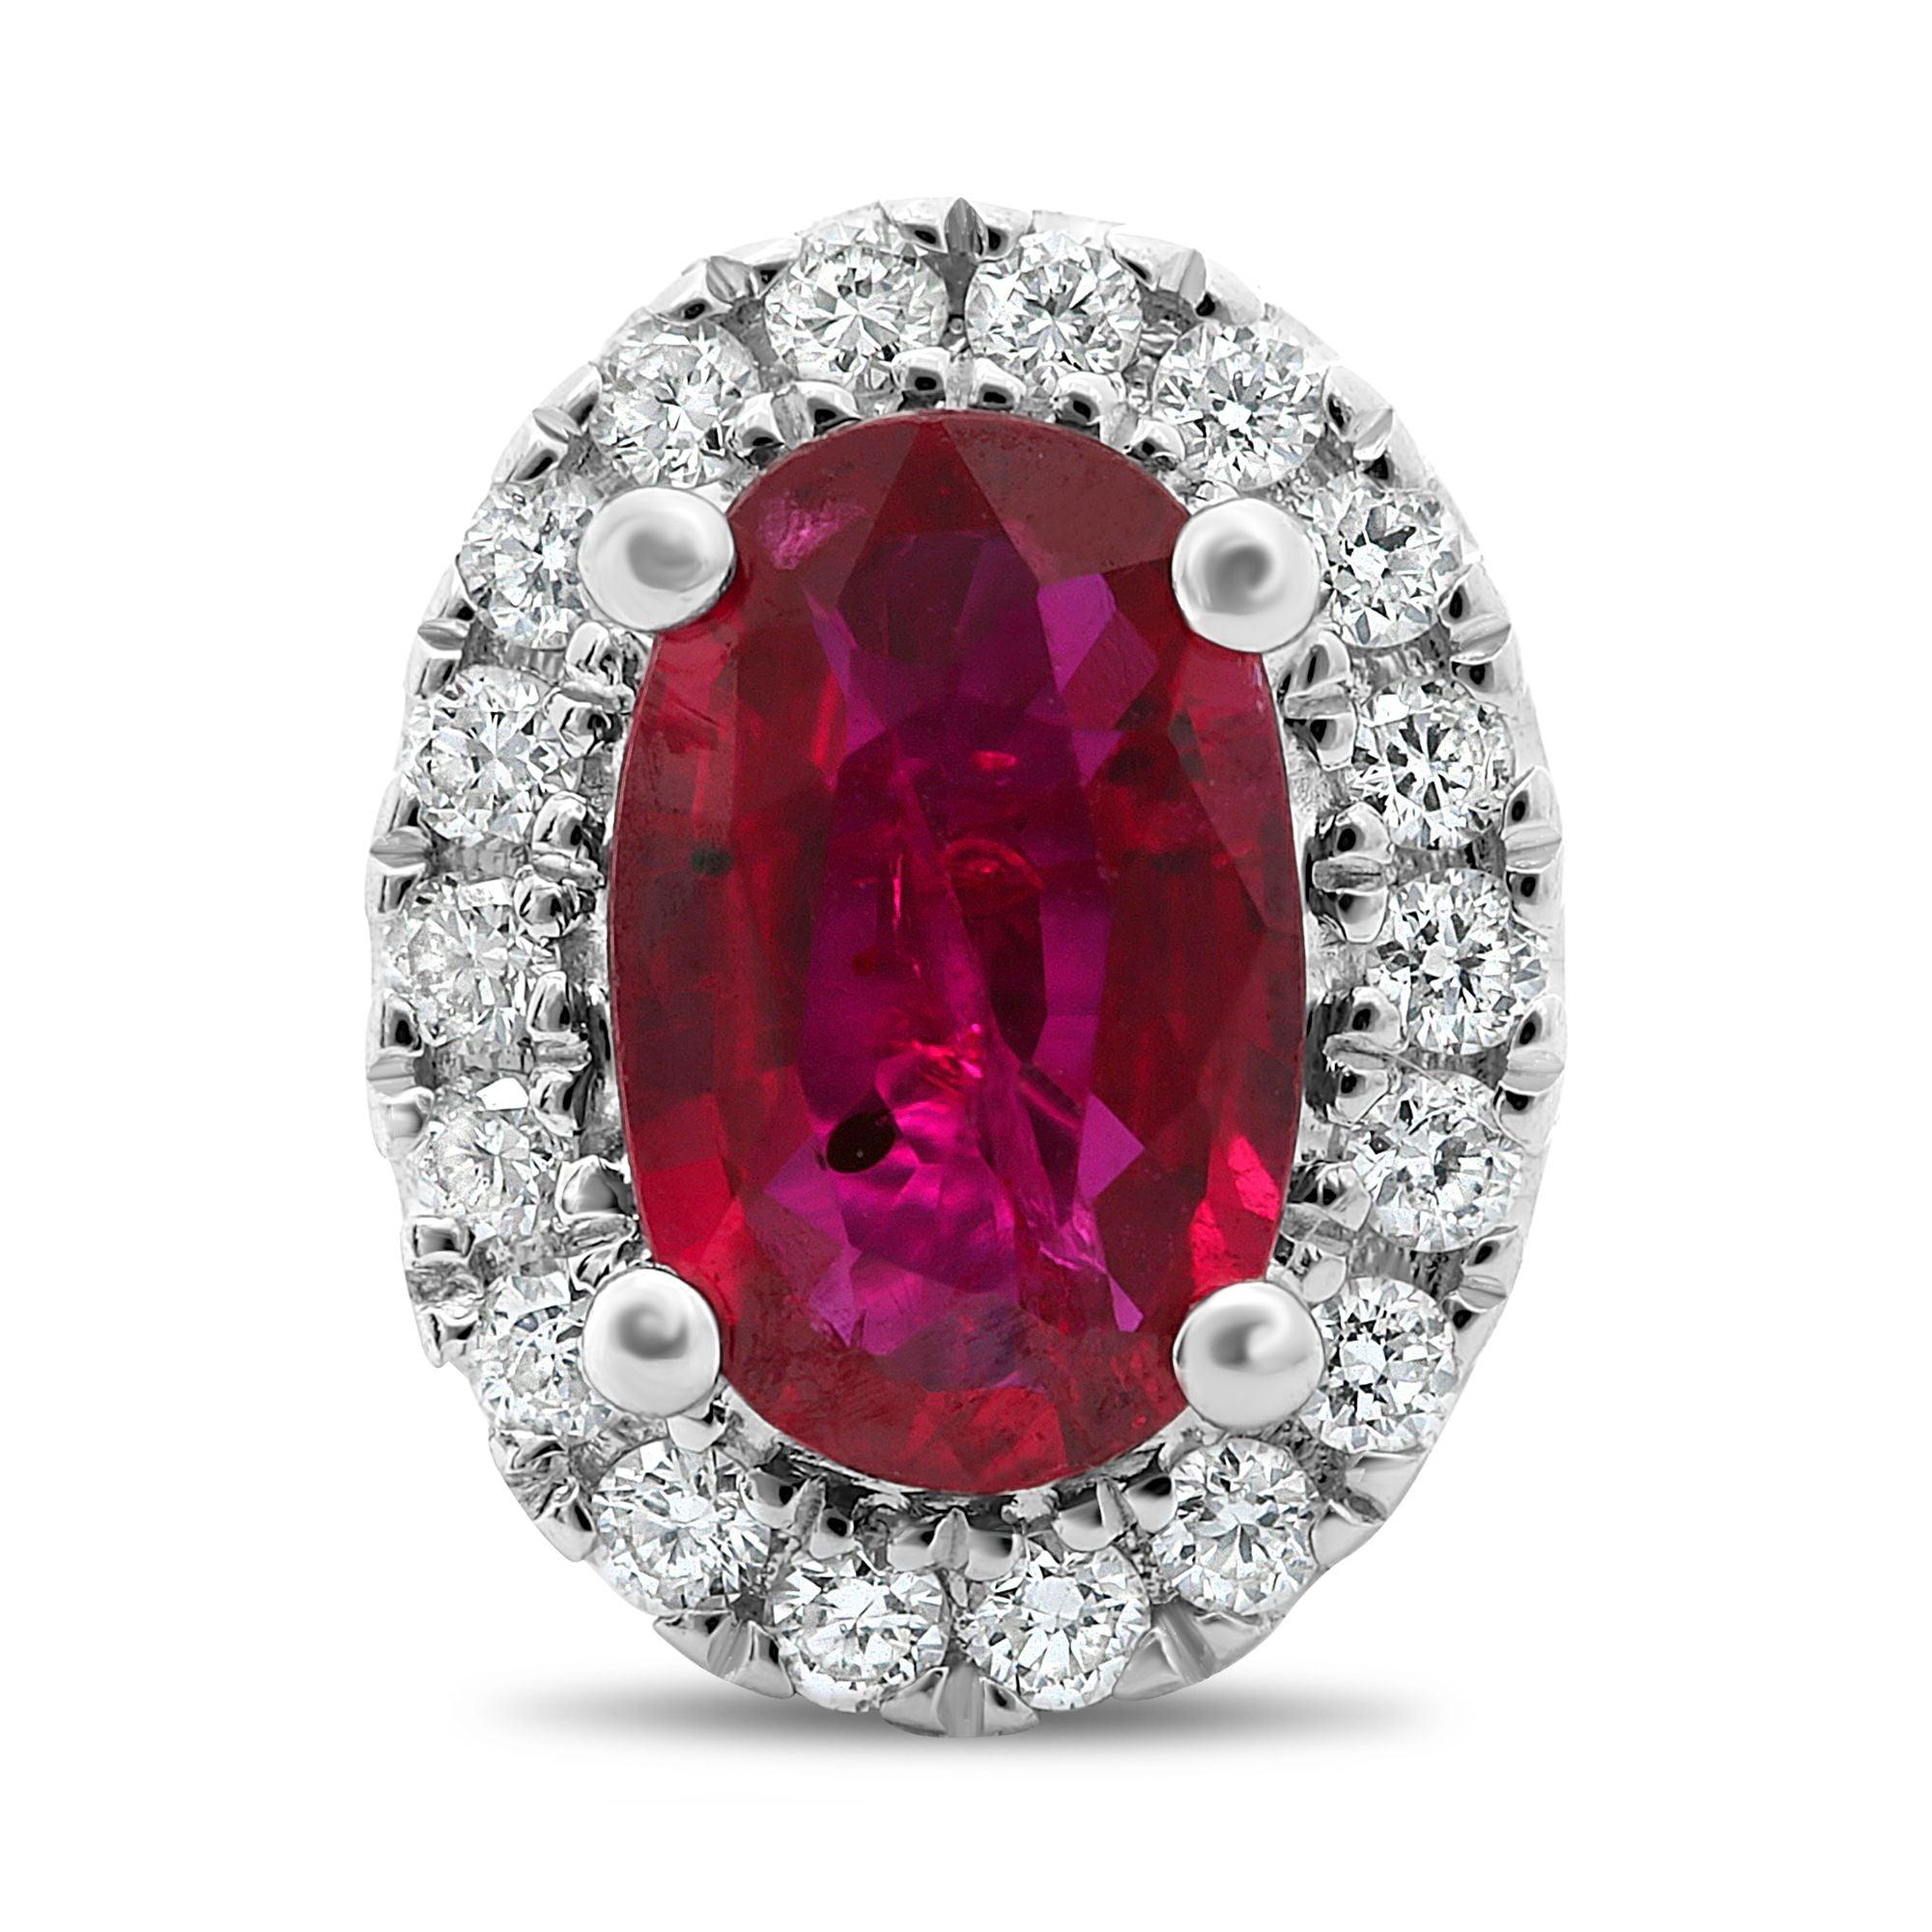 At the center of these eye-catching 18 karat white gold stud earrings rest 1.28 carats of brilliant oval cut rubies. A sparkling halo of white diamonds surrounds each center stone with a total weight of 0.16 carats of round cut white diamonds